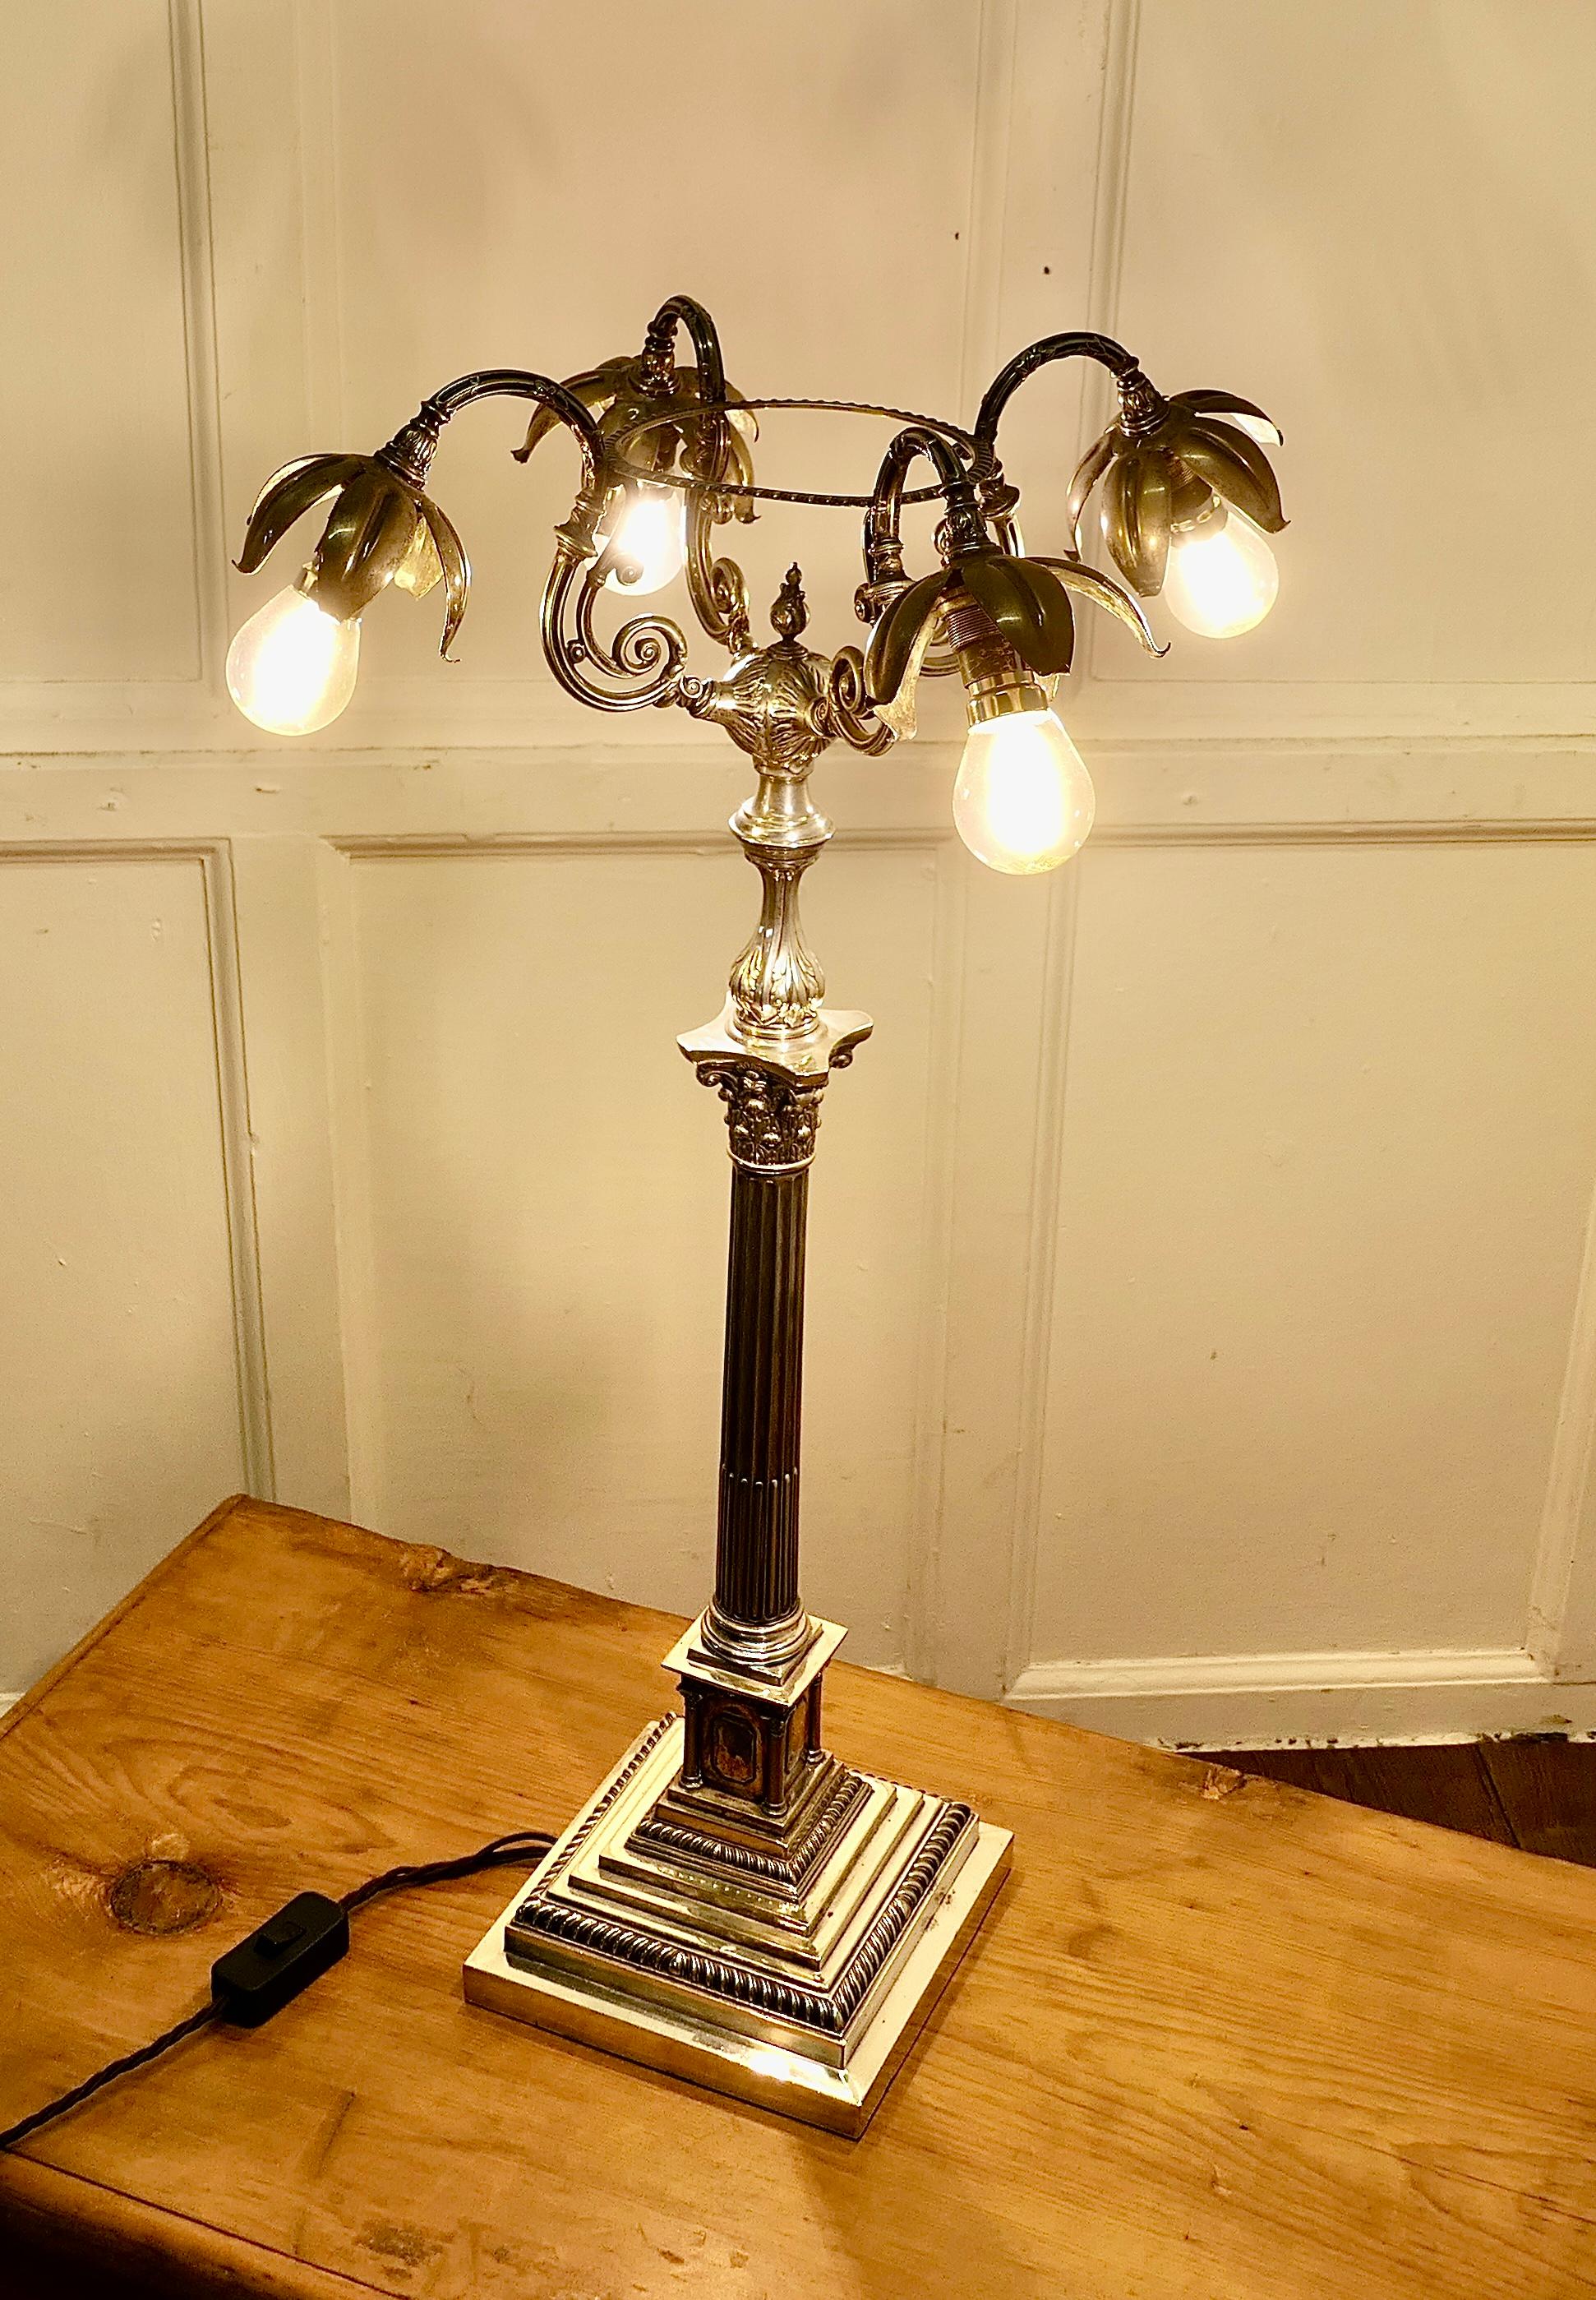 Tall Silver Plated Table Candelabra Sideboard Lamp   In Good Condition For Sale In Chillerton, Isle of Wight